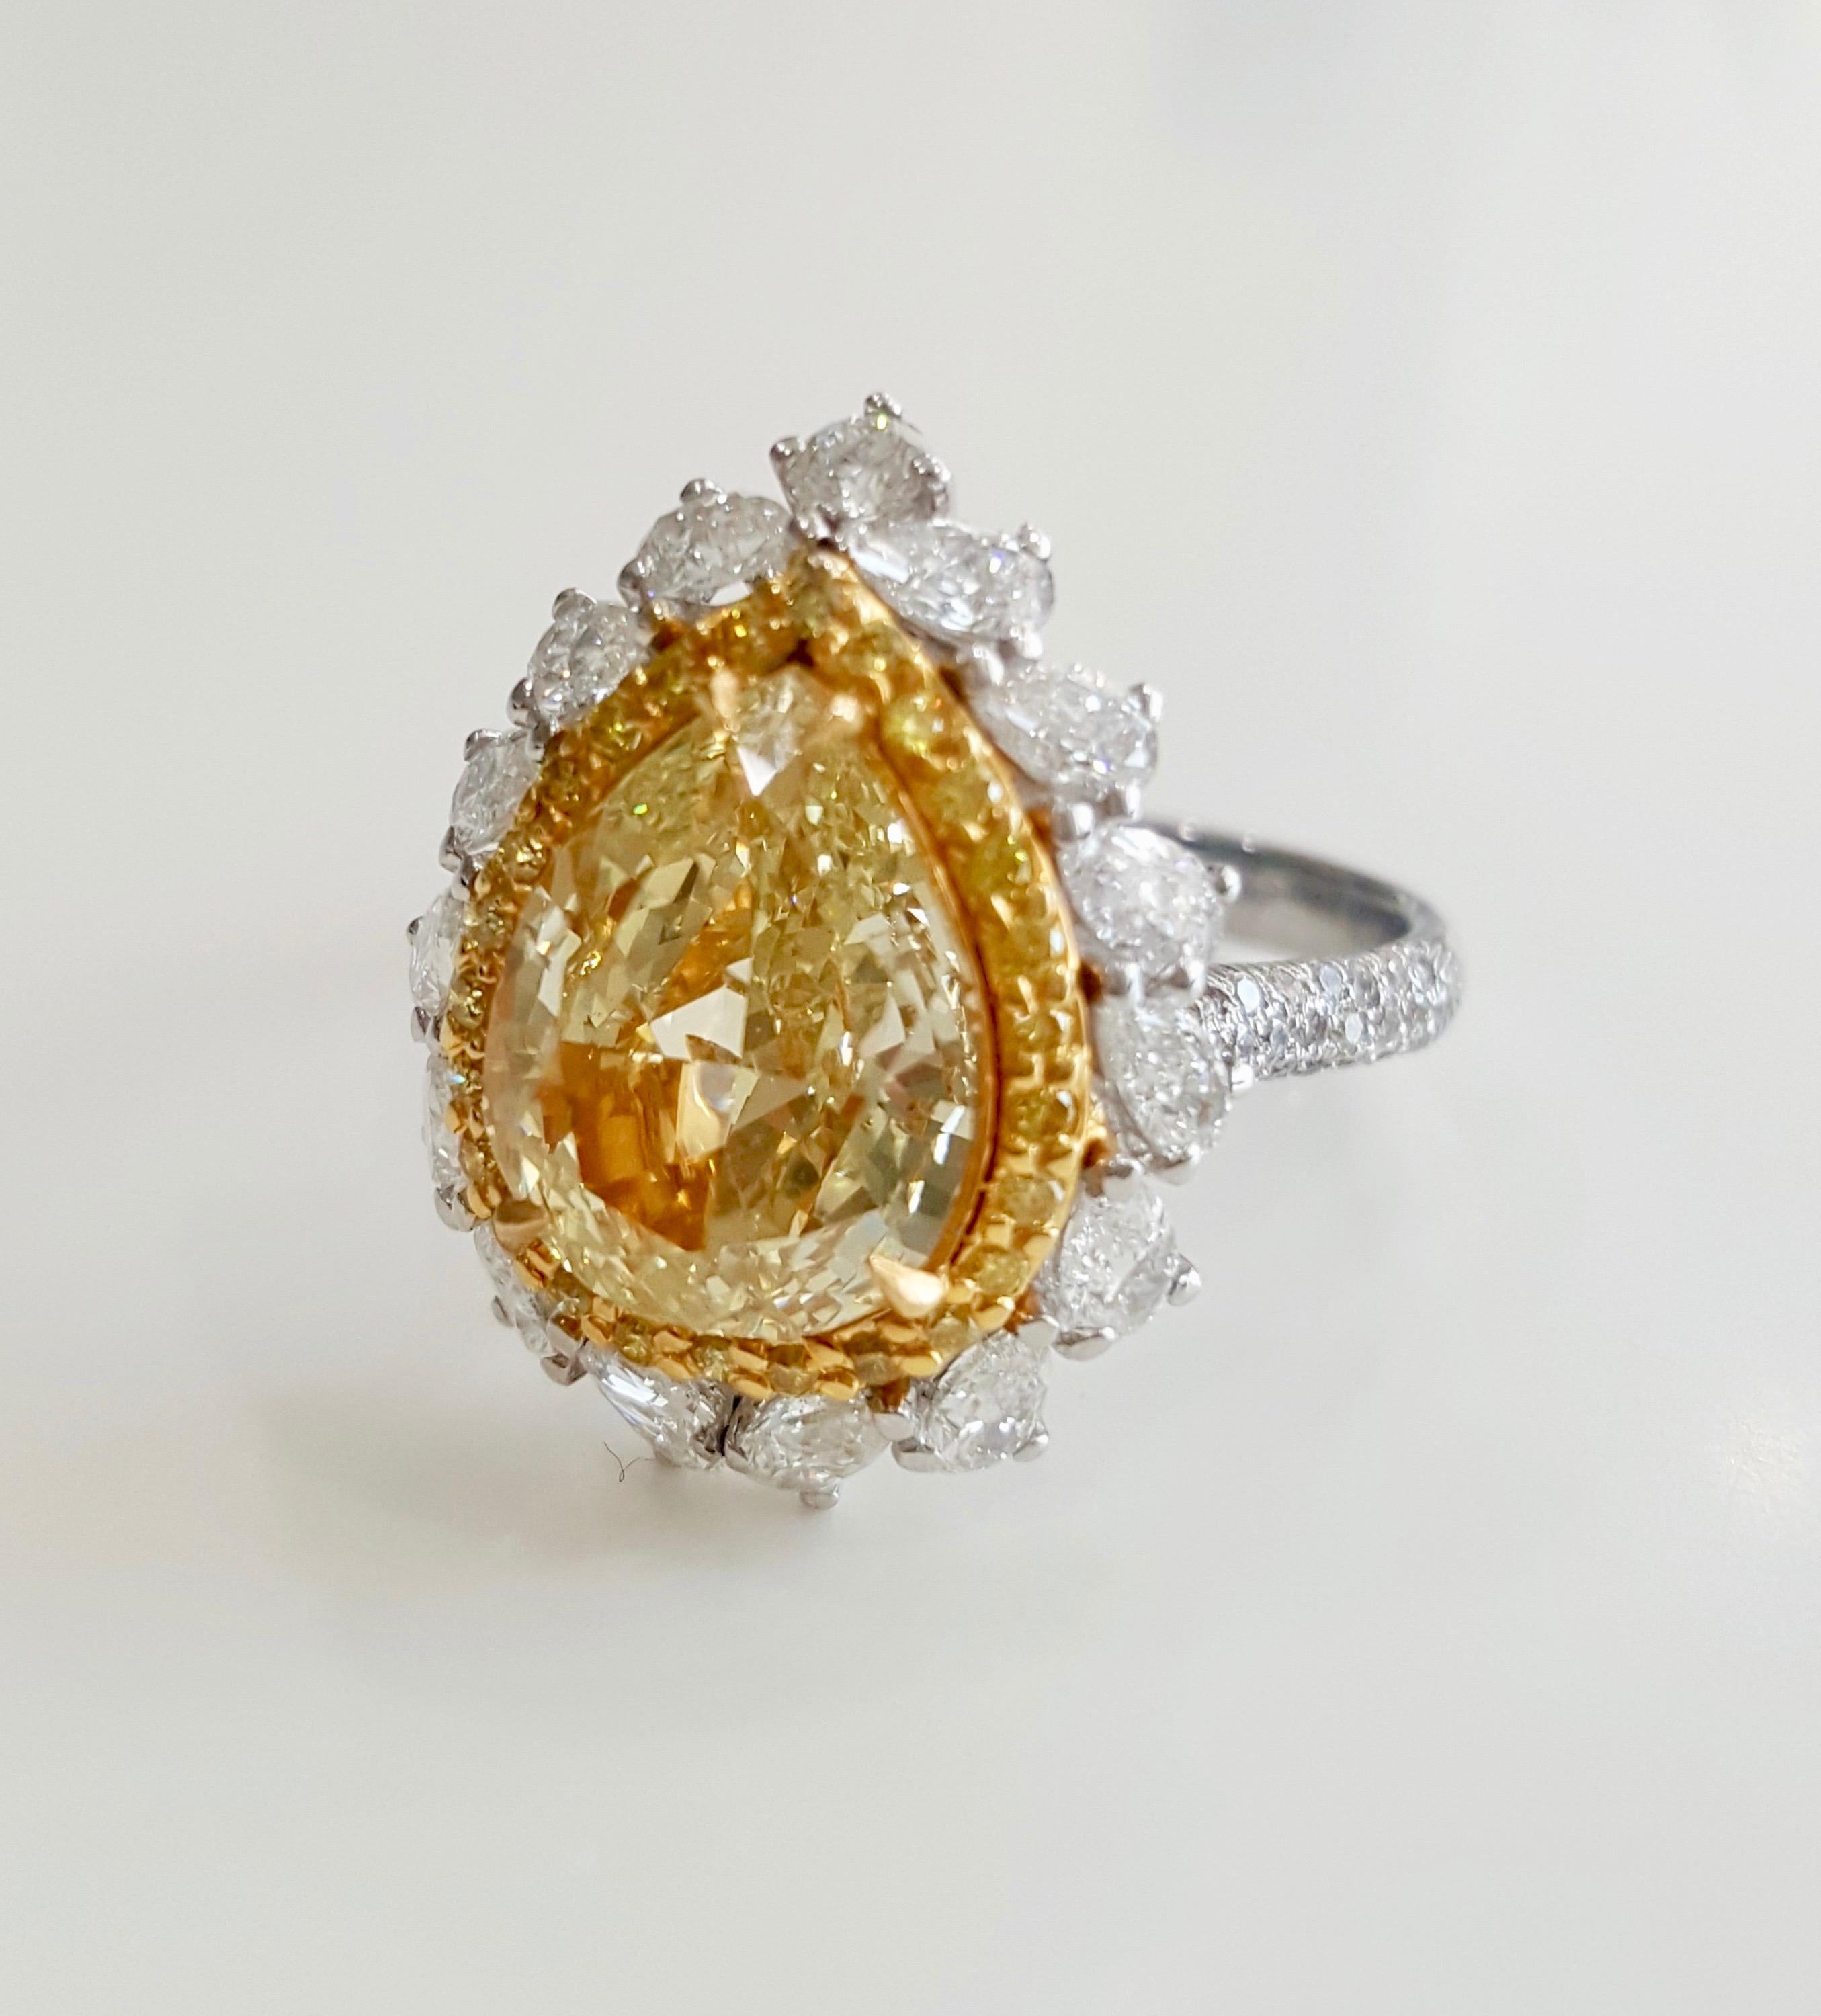 Custom designed diamond engagement ring by Moguldiam Inc with GIA certified natural fancy yellow pear brilliant cut diamond in the center weighing 3 carat with SI 2 clarity set in double halo mounting with a row of small  yellow diamonds and small